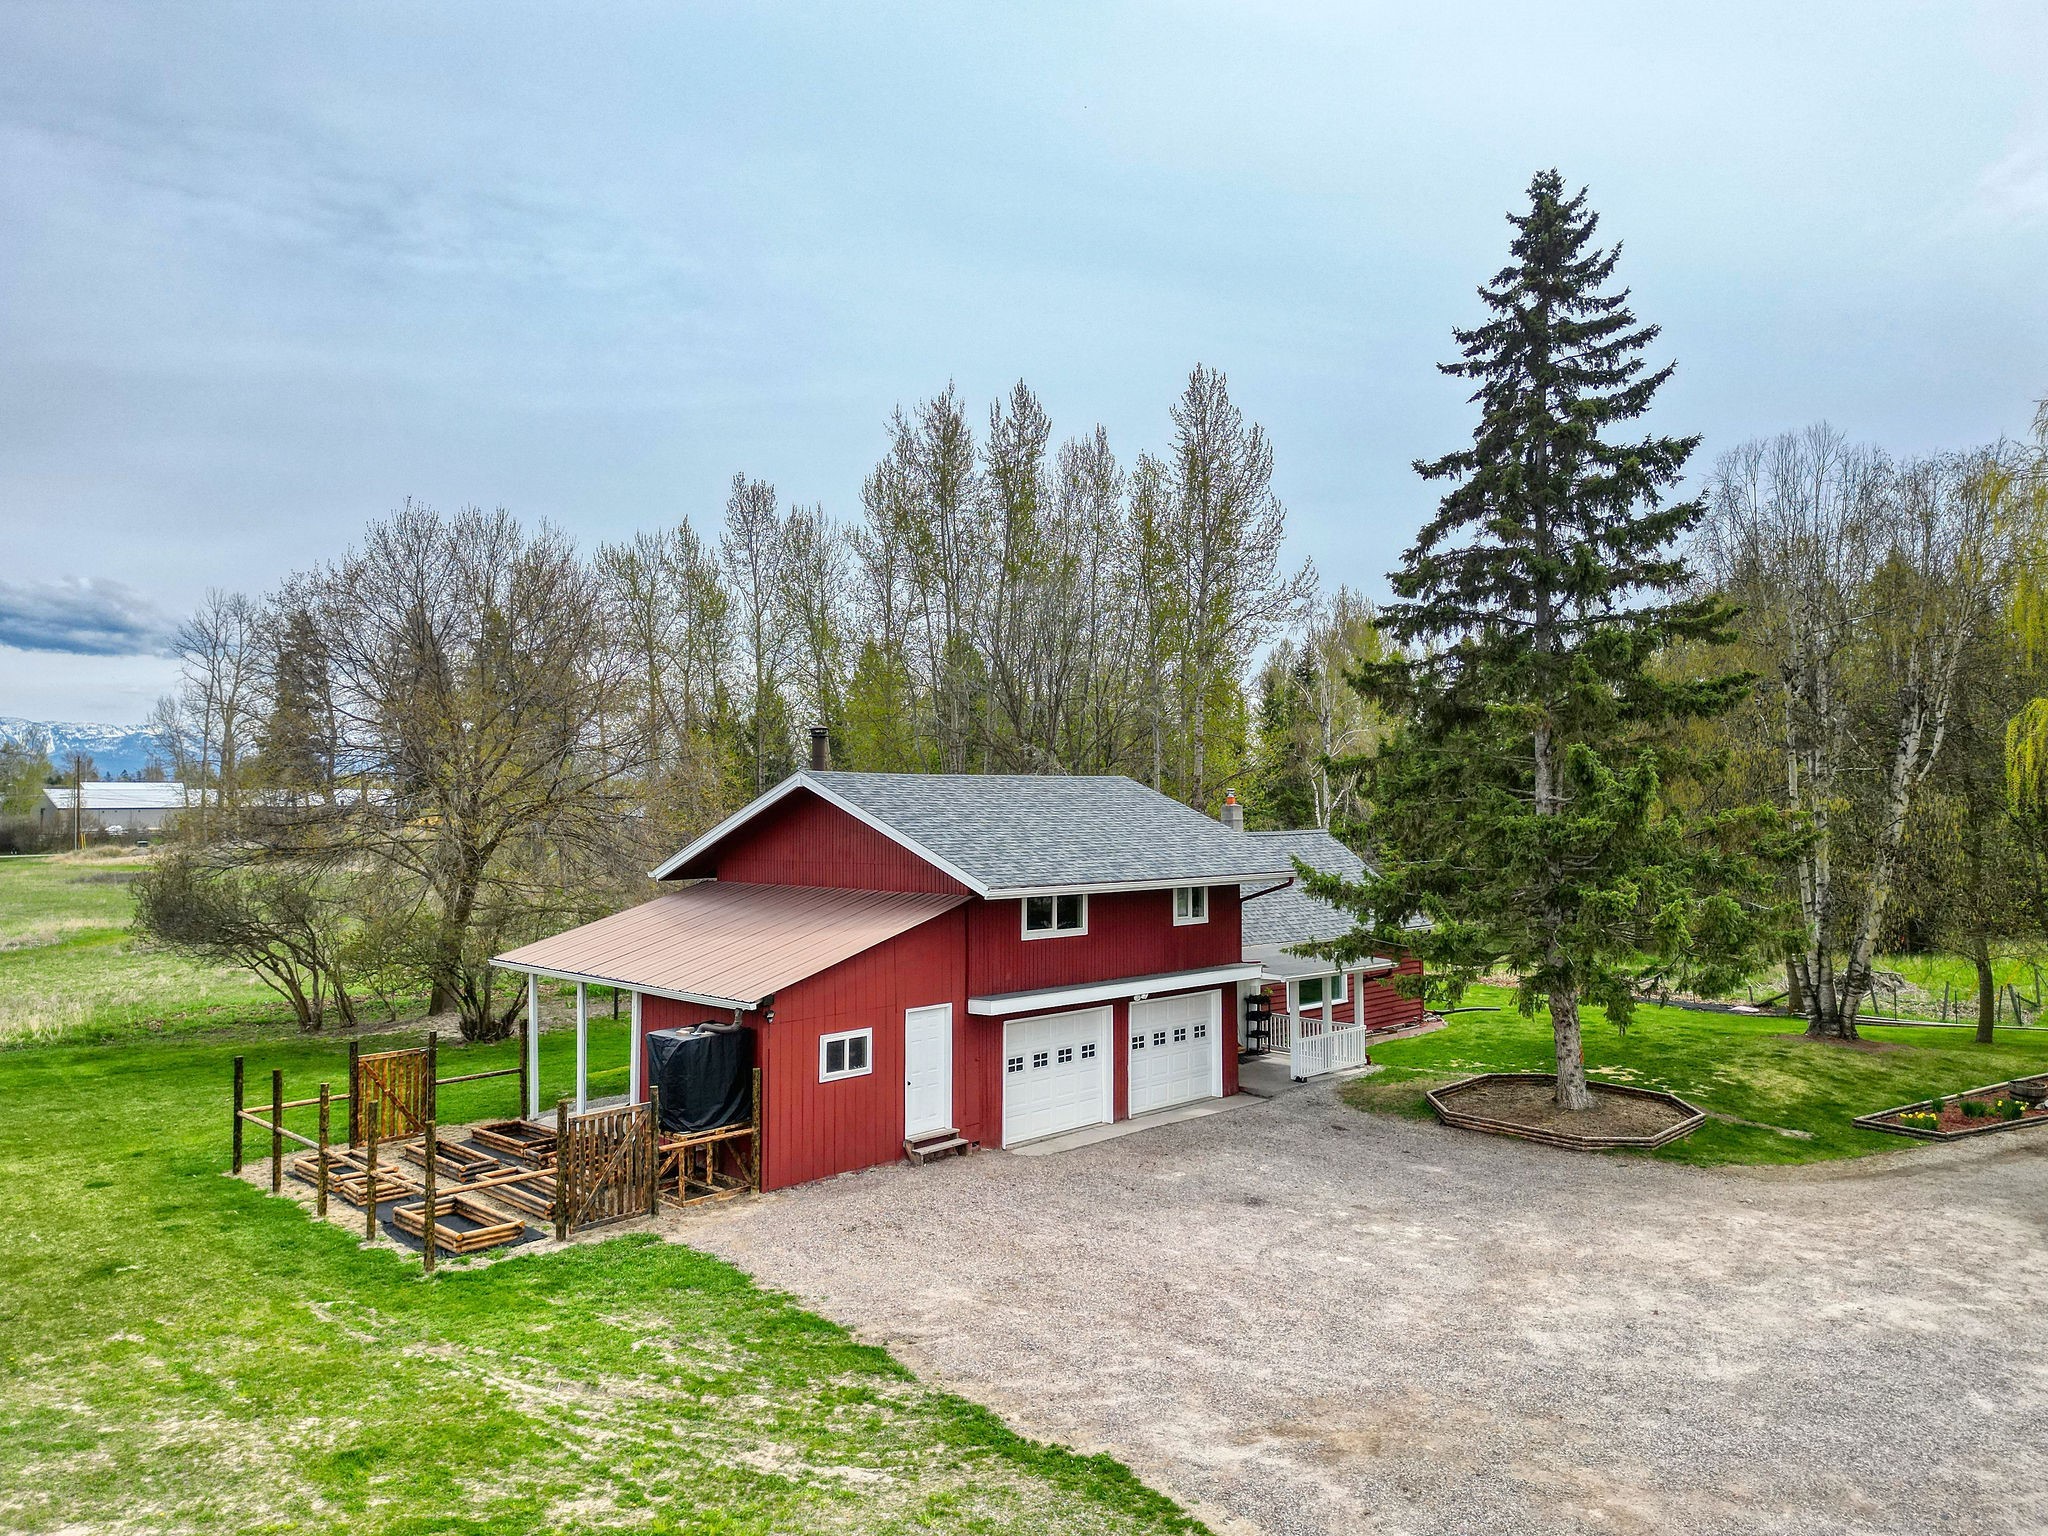 If you’re a little bit country and like the idea of being in town too…How does a Farmhouse in Montana on 1.21 acres sound for the perfect place to call home? Welcome 35 River Rd. in Kalispell! Step into Montana farmhouse living at its finest, where every detail has been carefully crafted to perfection. Completely remodeled, this home seamlessly combines rustic charm with modern convenience. The heart of the home is the brand-new kitchen, boasting butcher block countertops, cabinets, and backsplash, complemented by state-of-the-art appliances and a ton of pantry/storage space. Whether you're preparing a family feast or entertaining guests, this kitchen is sure to impress. 4 bedrooms, 2 baths; with two bedrooms, one bath and an office on the main level, there's plenty of space for everyone to spread out and relax with a roaring fireplace in the living room. Please call Leah Lindsay at (406)261-1859, Kayla Chamberlain at (406)471-9693, or your real estate professional. Gaze out the humongous picture window in the living room while enjoying the view of two of the most mature Willow Trees in the flathead!
The primary en-suite, located upstairs, features a wood fireplace, built-in closet, stunning bathroom and a small deck where you can unwind and soak in the panoramic mountain views. There’s another large bedroom up a separate staircase for privacy, you’ll also find a cold storage attic completely insulated for all your storage needs. 
There was a brand new roof and gutters installed in 2023!
Outside, the possibilities are endless on the expansive 1.21-acre property with attached two car garage and a bonus heated room that could be a craft room/shop/office area. There’s potential for a dog run/garden area as well as a small 10 x 20 garden complete with a fresh water cistern for your gardening needs!
Imagine enjoying morning coffee on the open front porch, or a roaring in the evening hanging by the firepit surrounded by  the tranquility of nature. With room to expand, the potential for this property is limitless. 
Nestled amidst the breathtaking Rocky Mountains, this charming home offers incredible views of nature's wonders, including glimpses of Glacier National Park. 
Conveniently located close to town yet offering the privacy of country living, this home truly offers the best of both worlds. Don't miss your chance to experience Montana living at its finest – schedule your showing today!